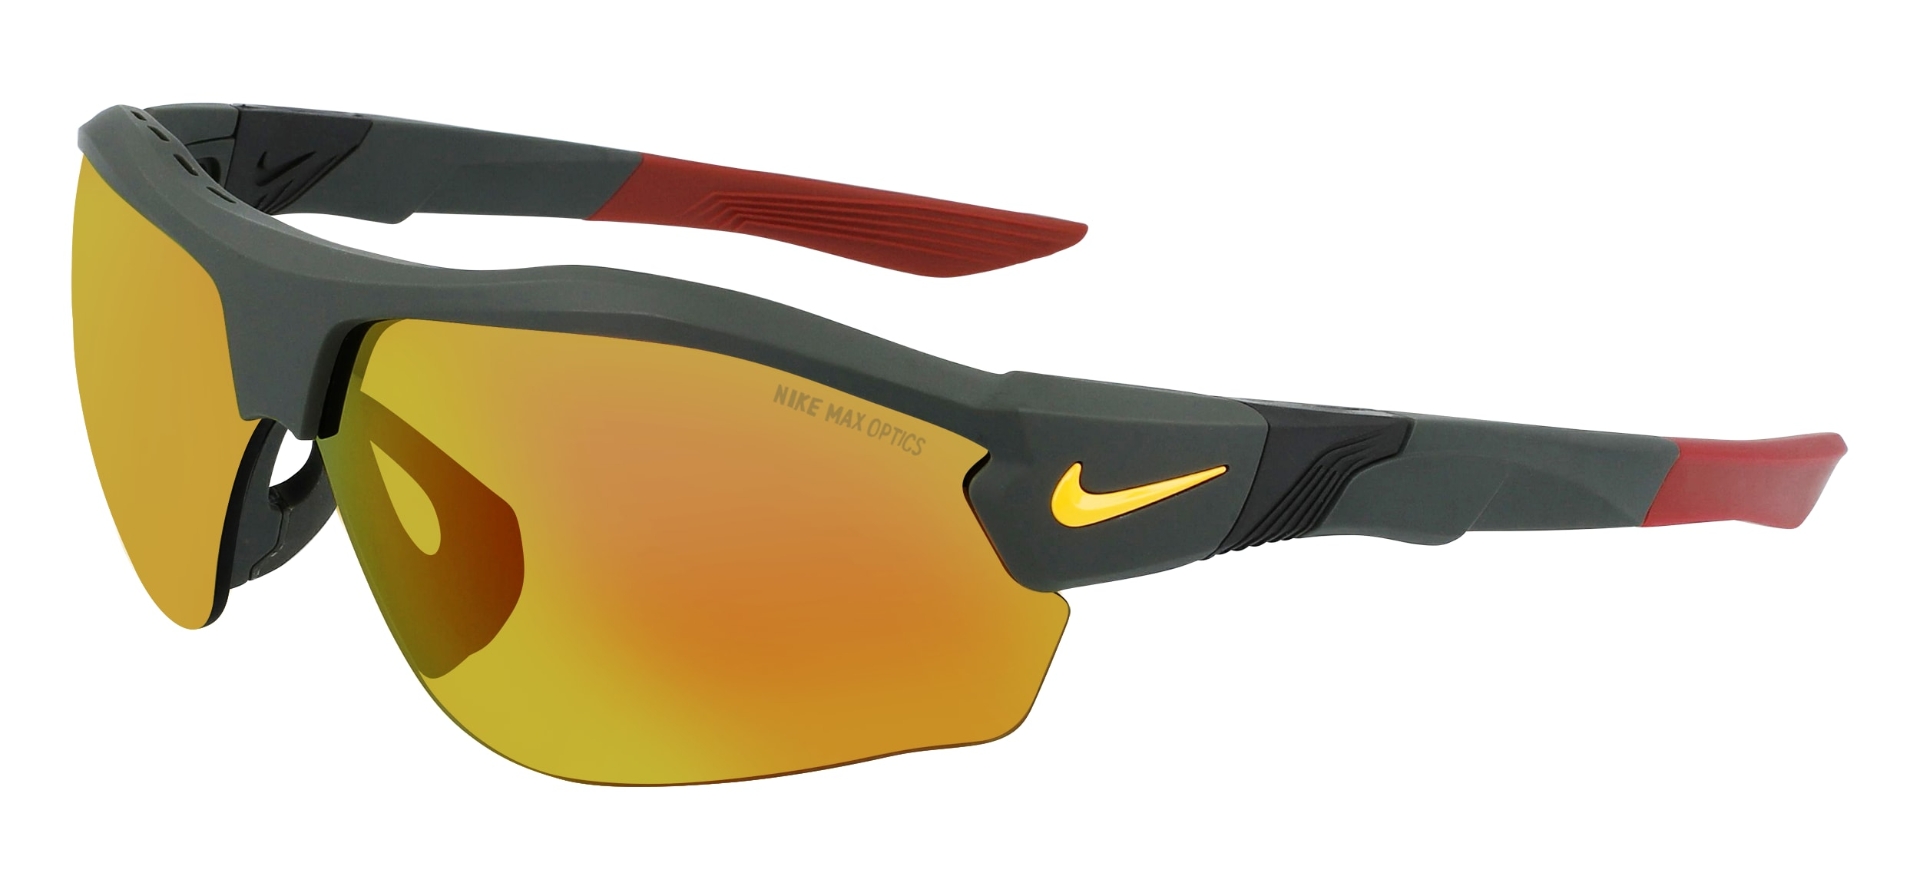 Best Nike Sunglasses with Interchangeable Lenses | SportRx